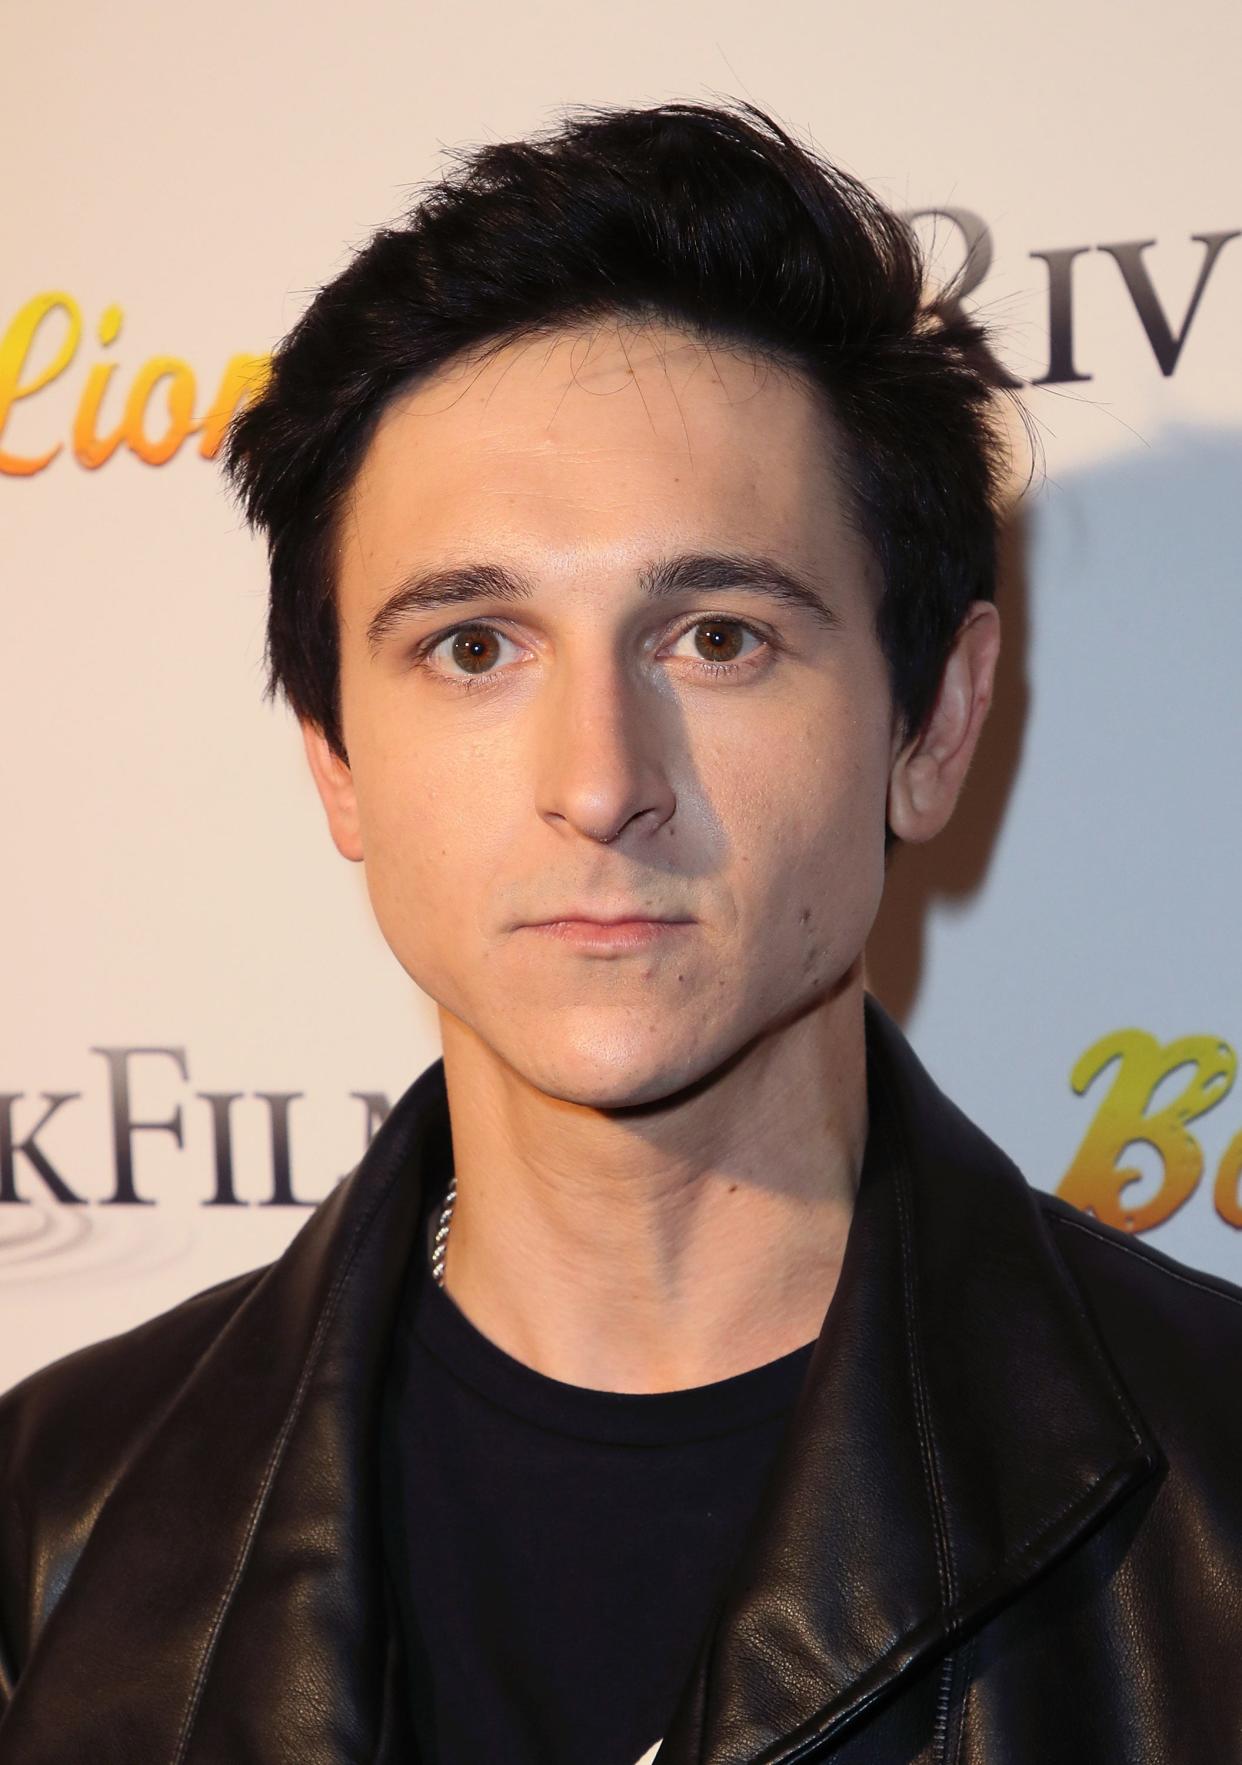 Actor Mitchel Musso was arrested in Texas on Saturday on charges of public intoxication and theft.